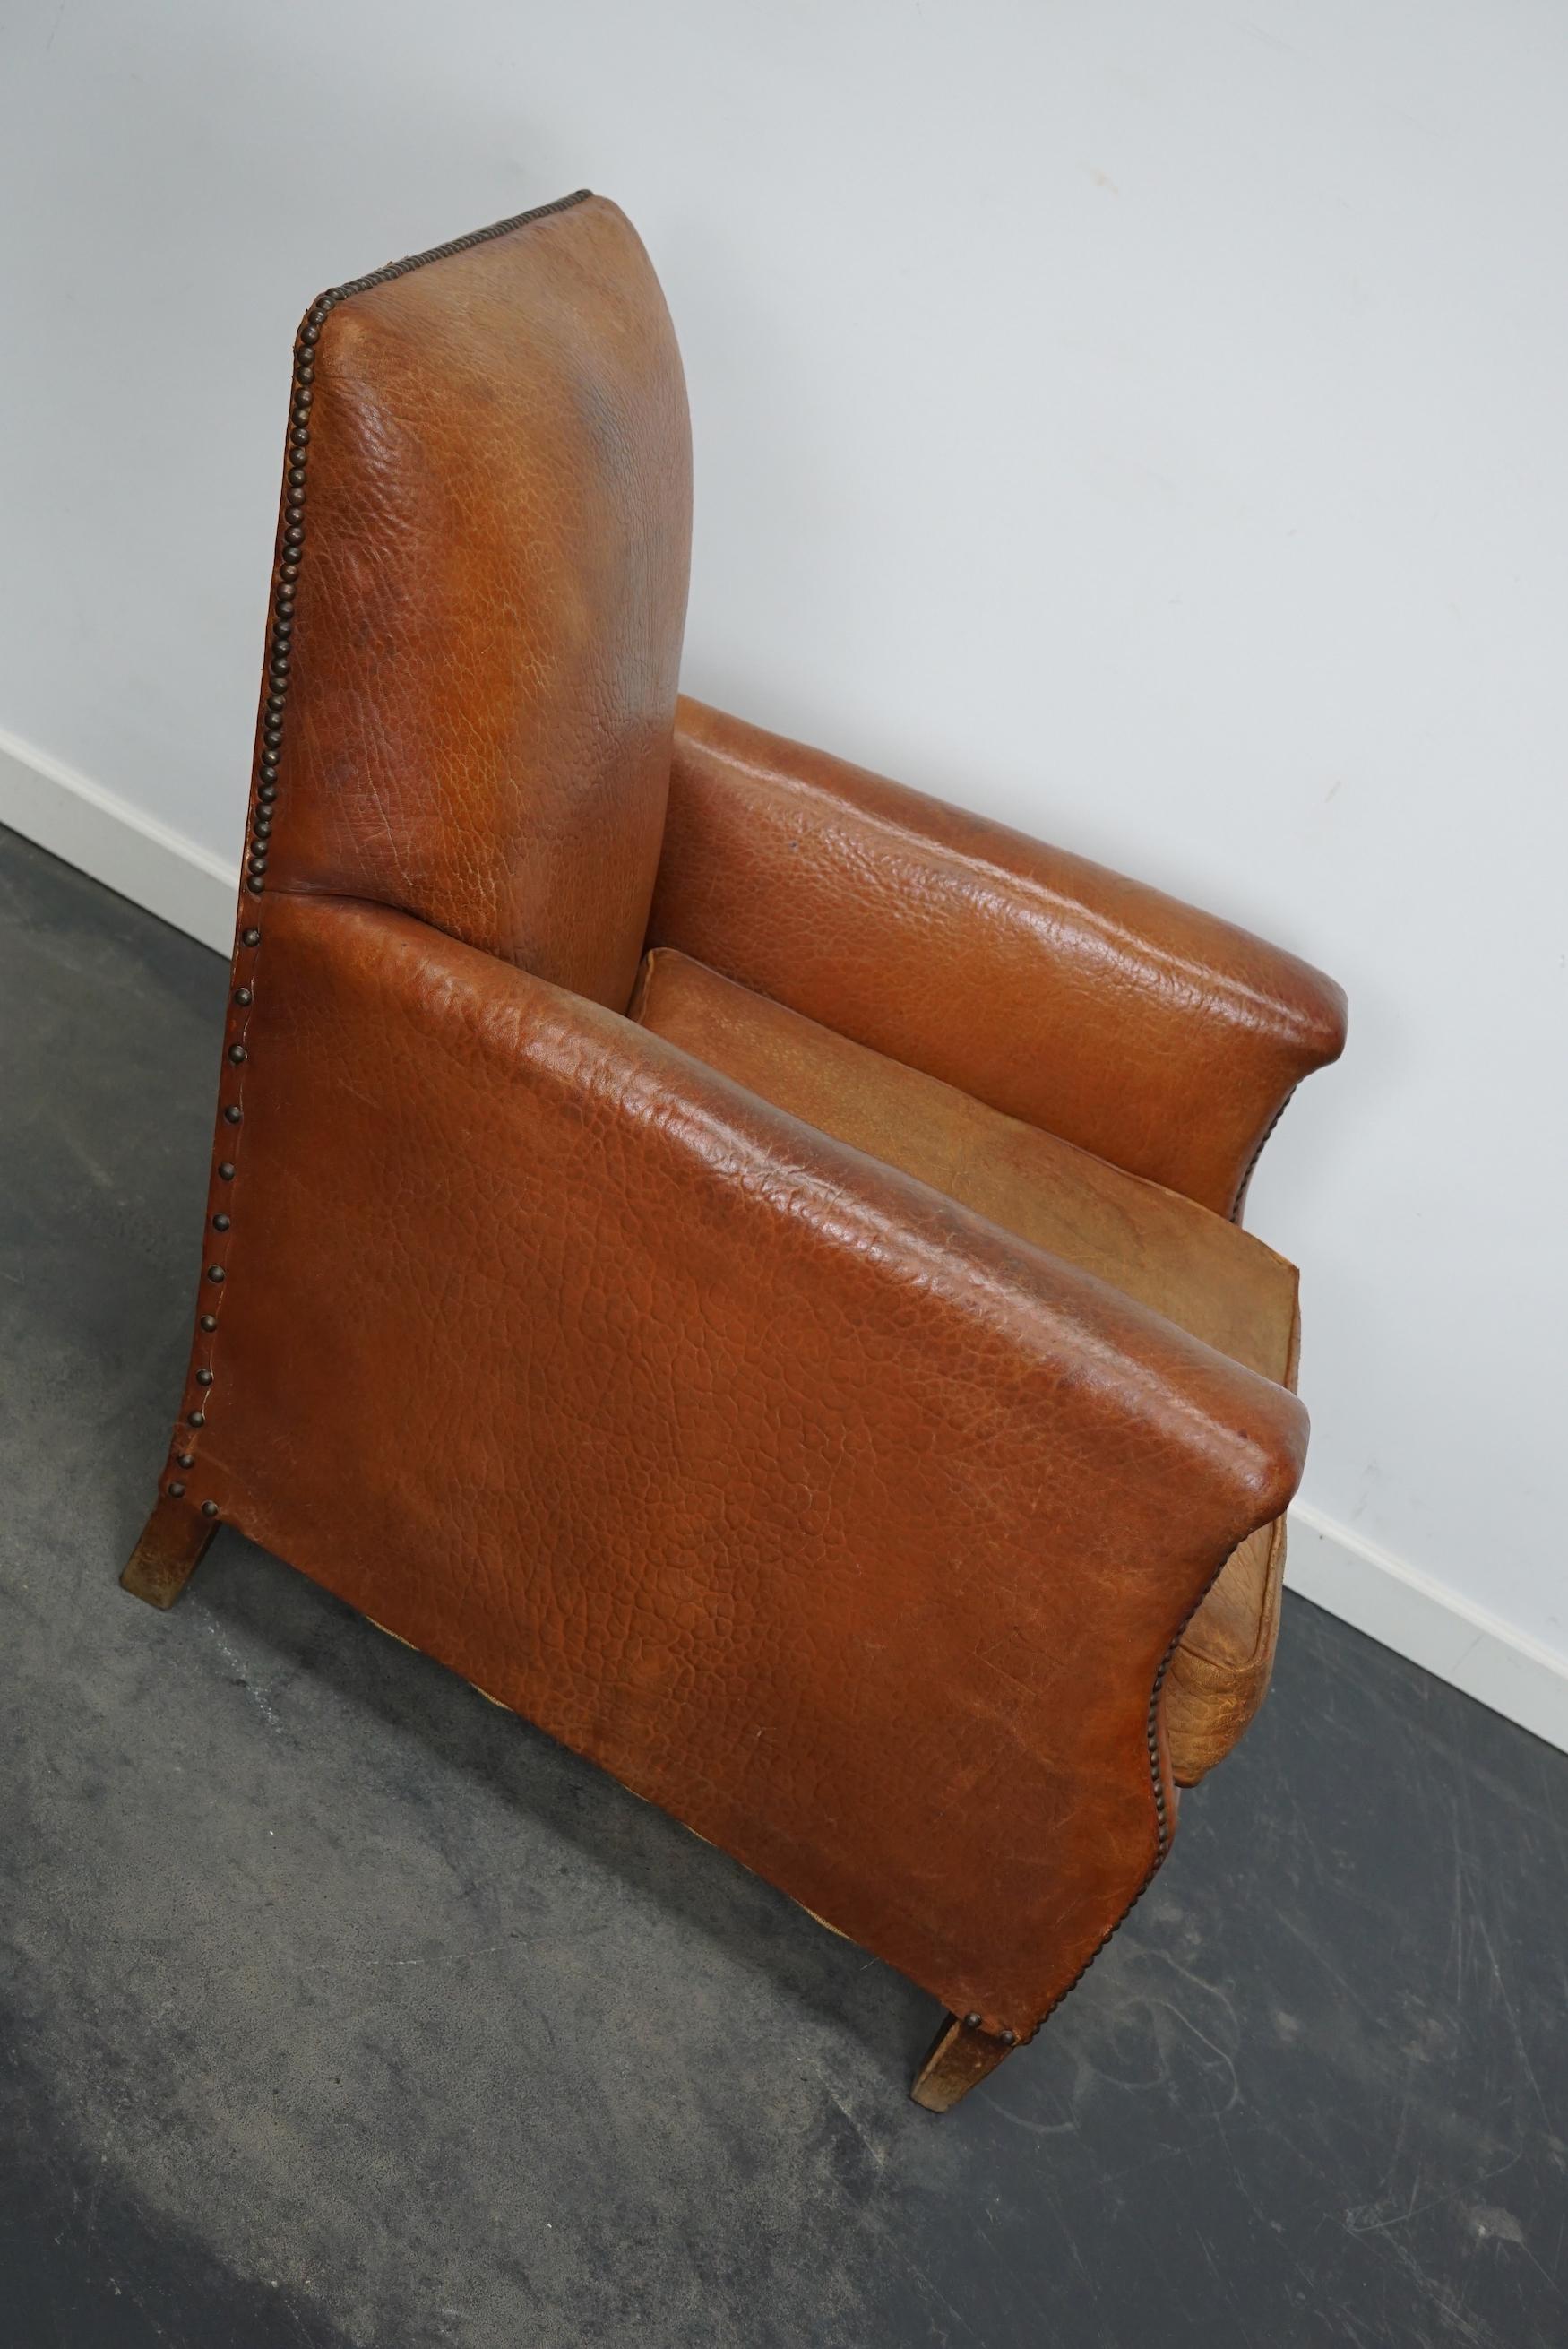 Vintage French Cognac-Colored Leather Club Chair, 1940s For Sale 3